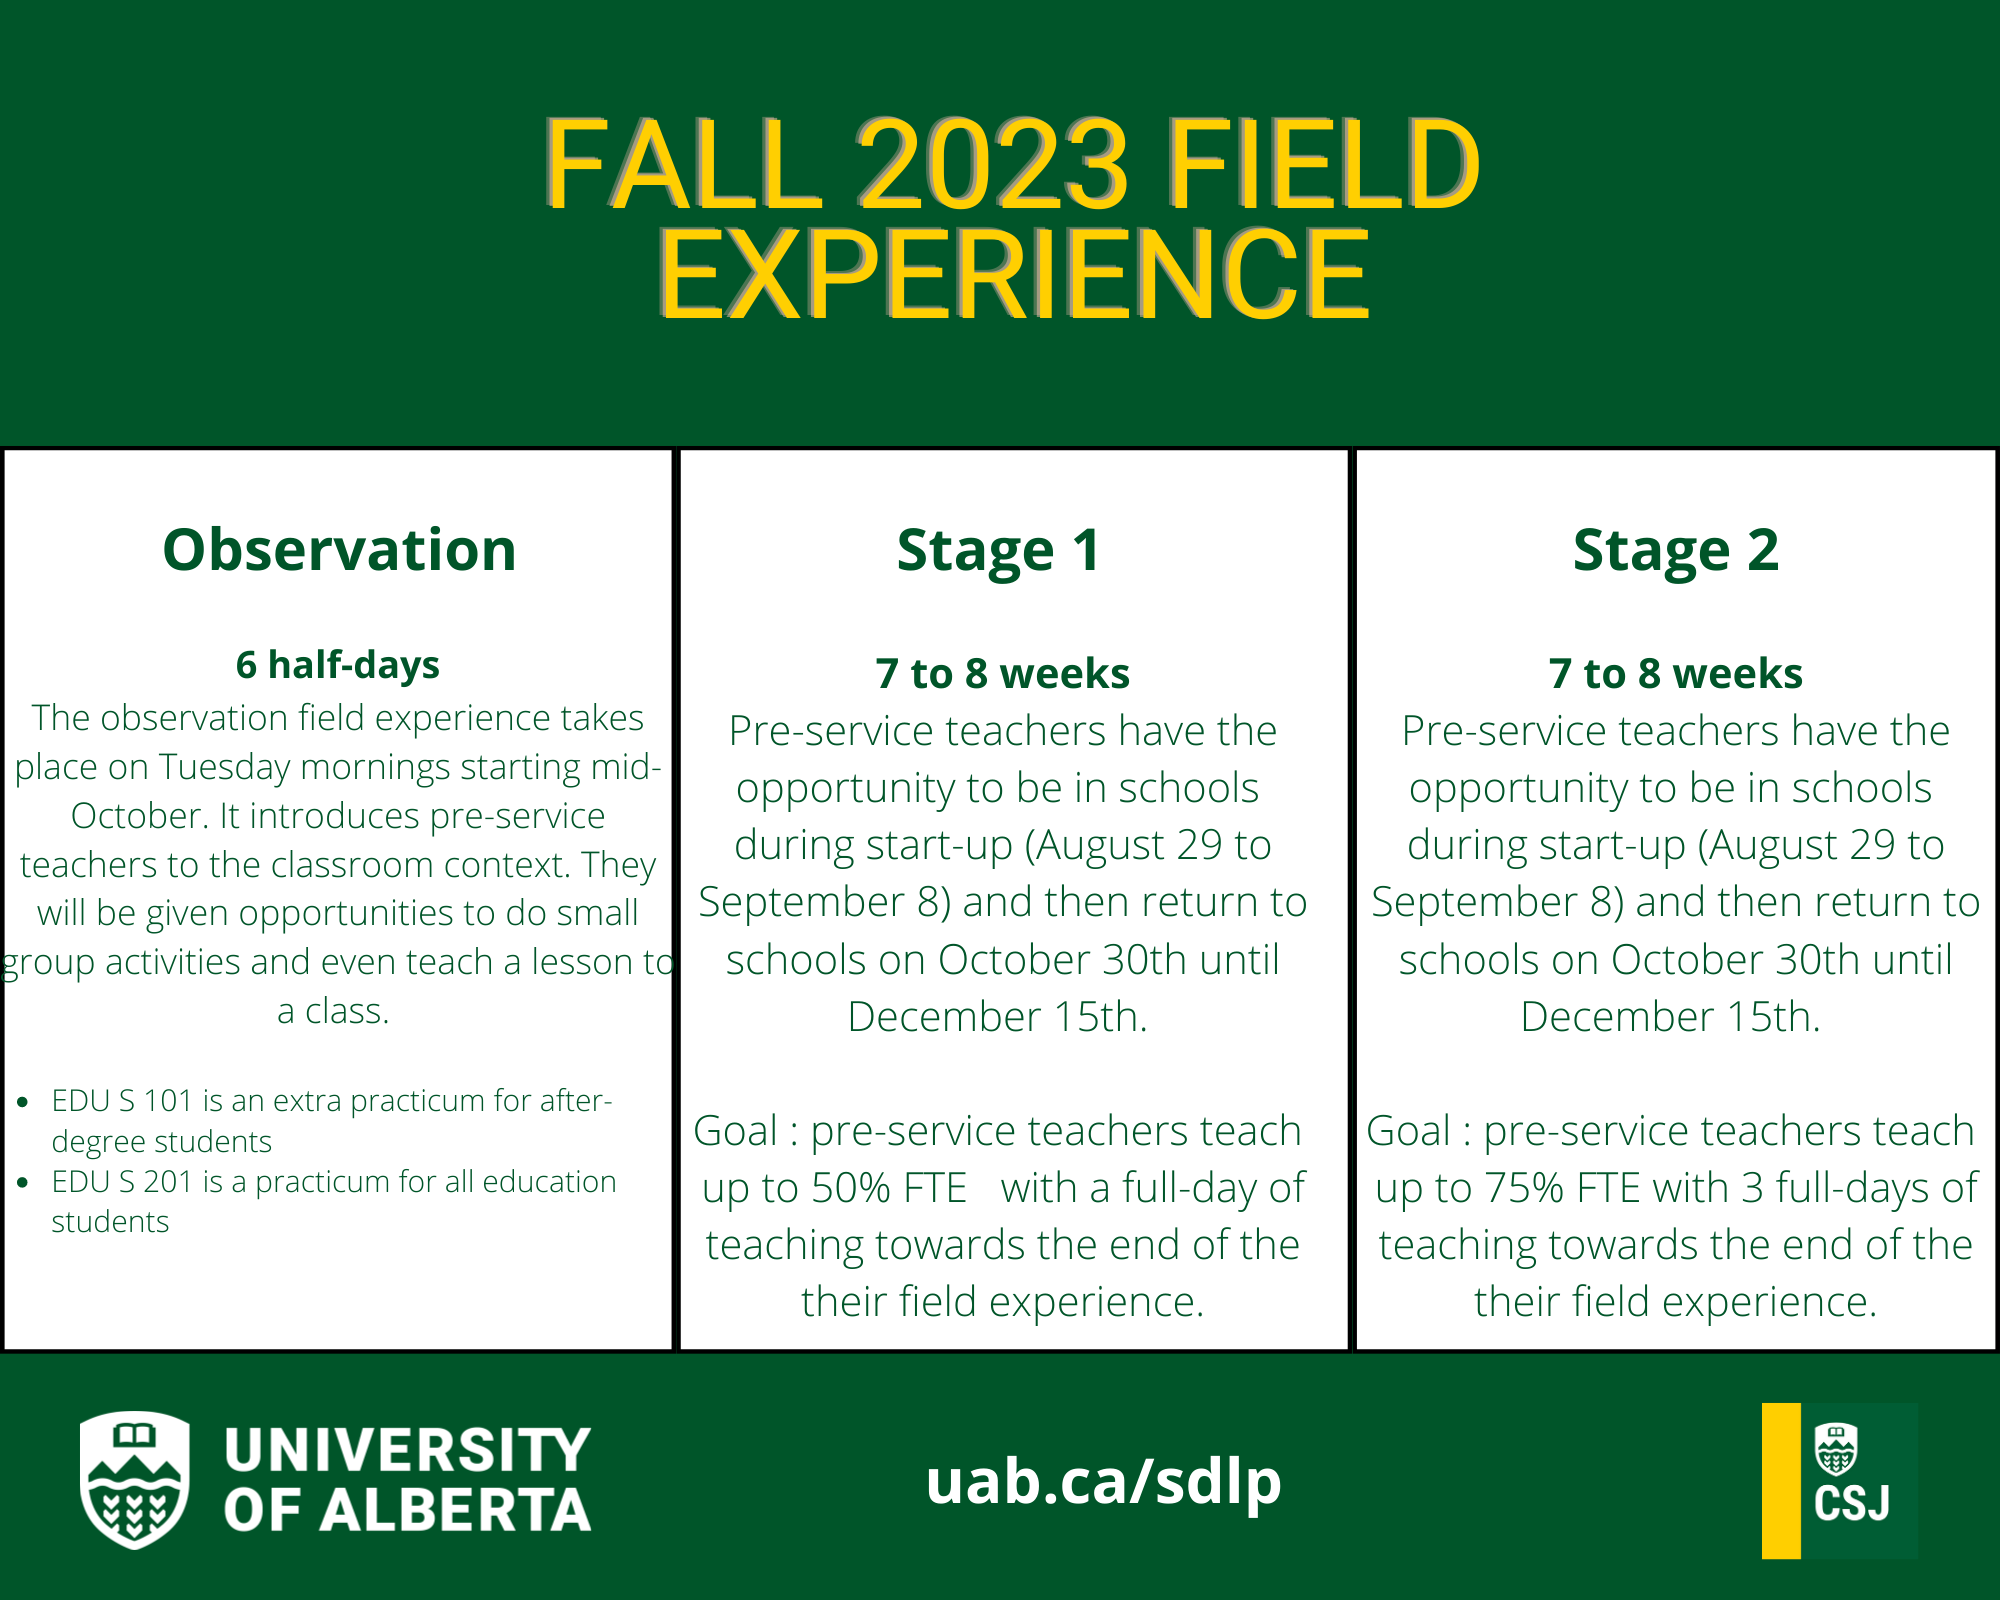 Dates for Fall 2023 Field Experiences